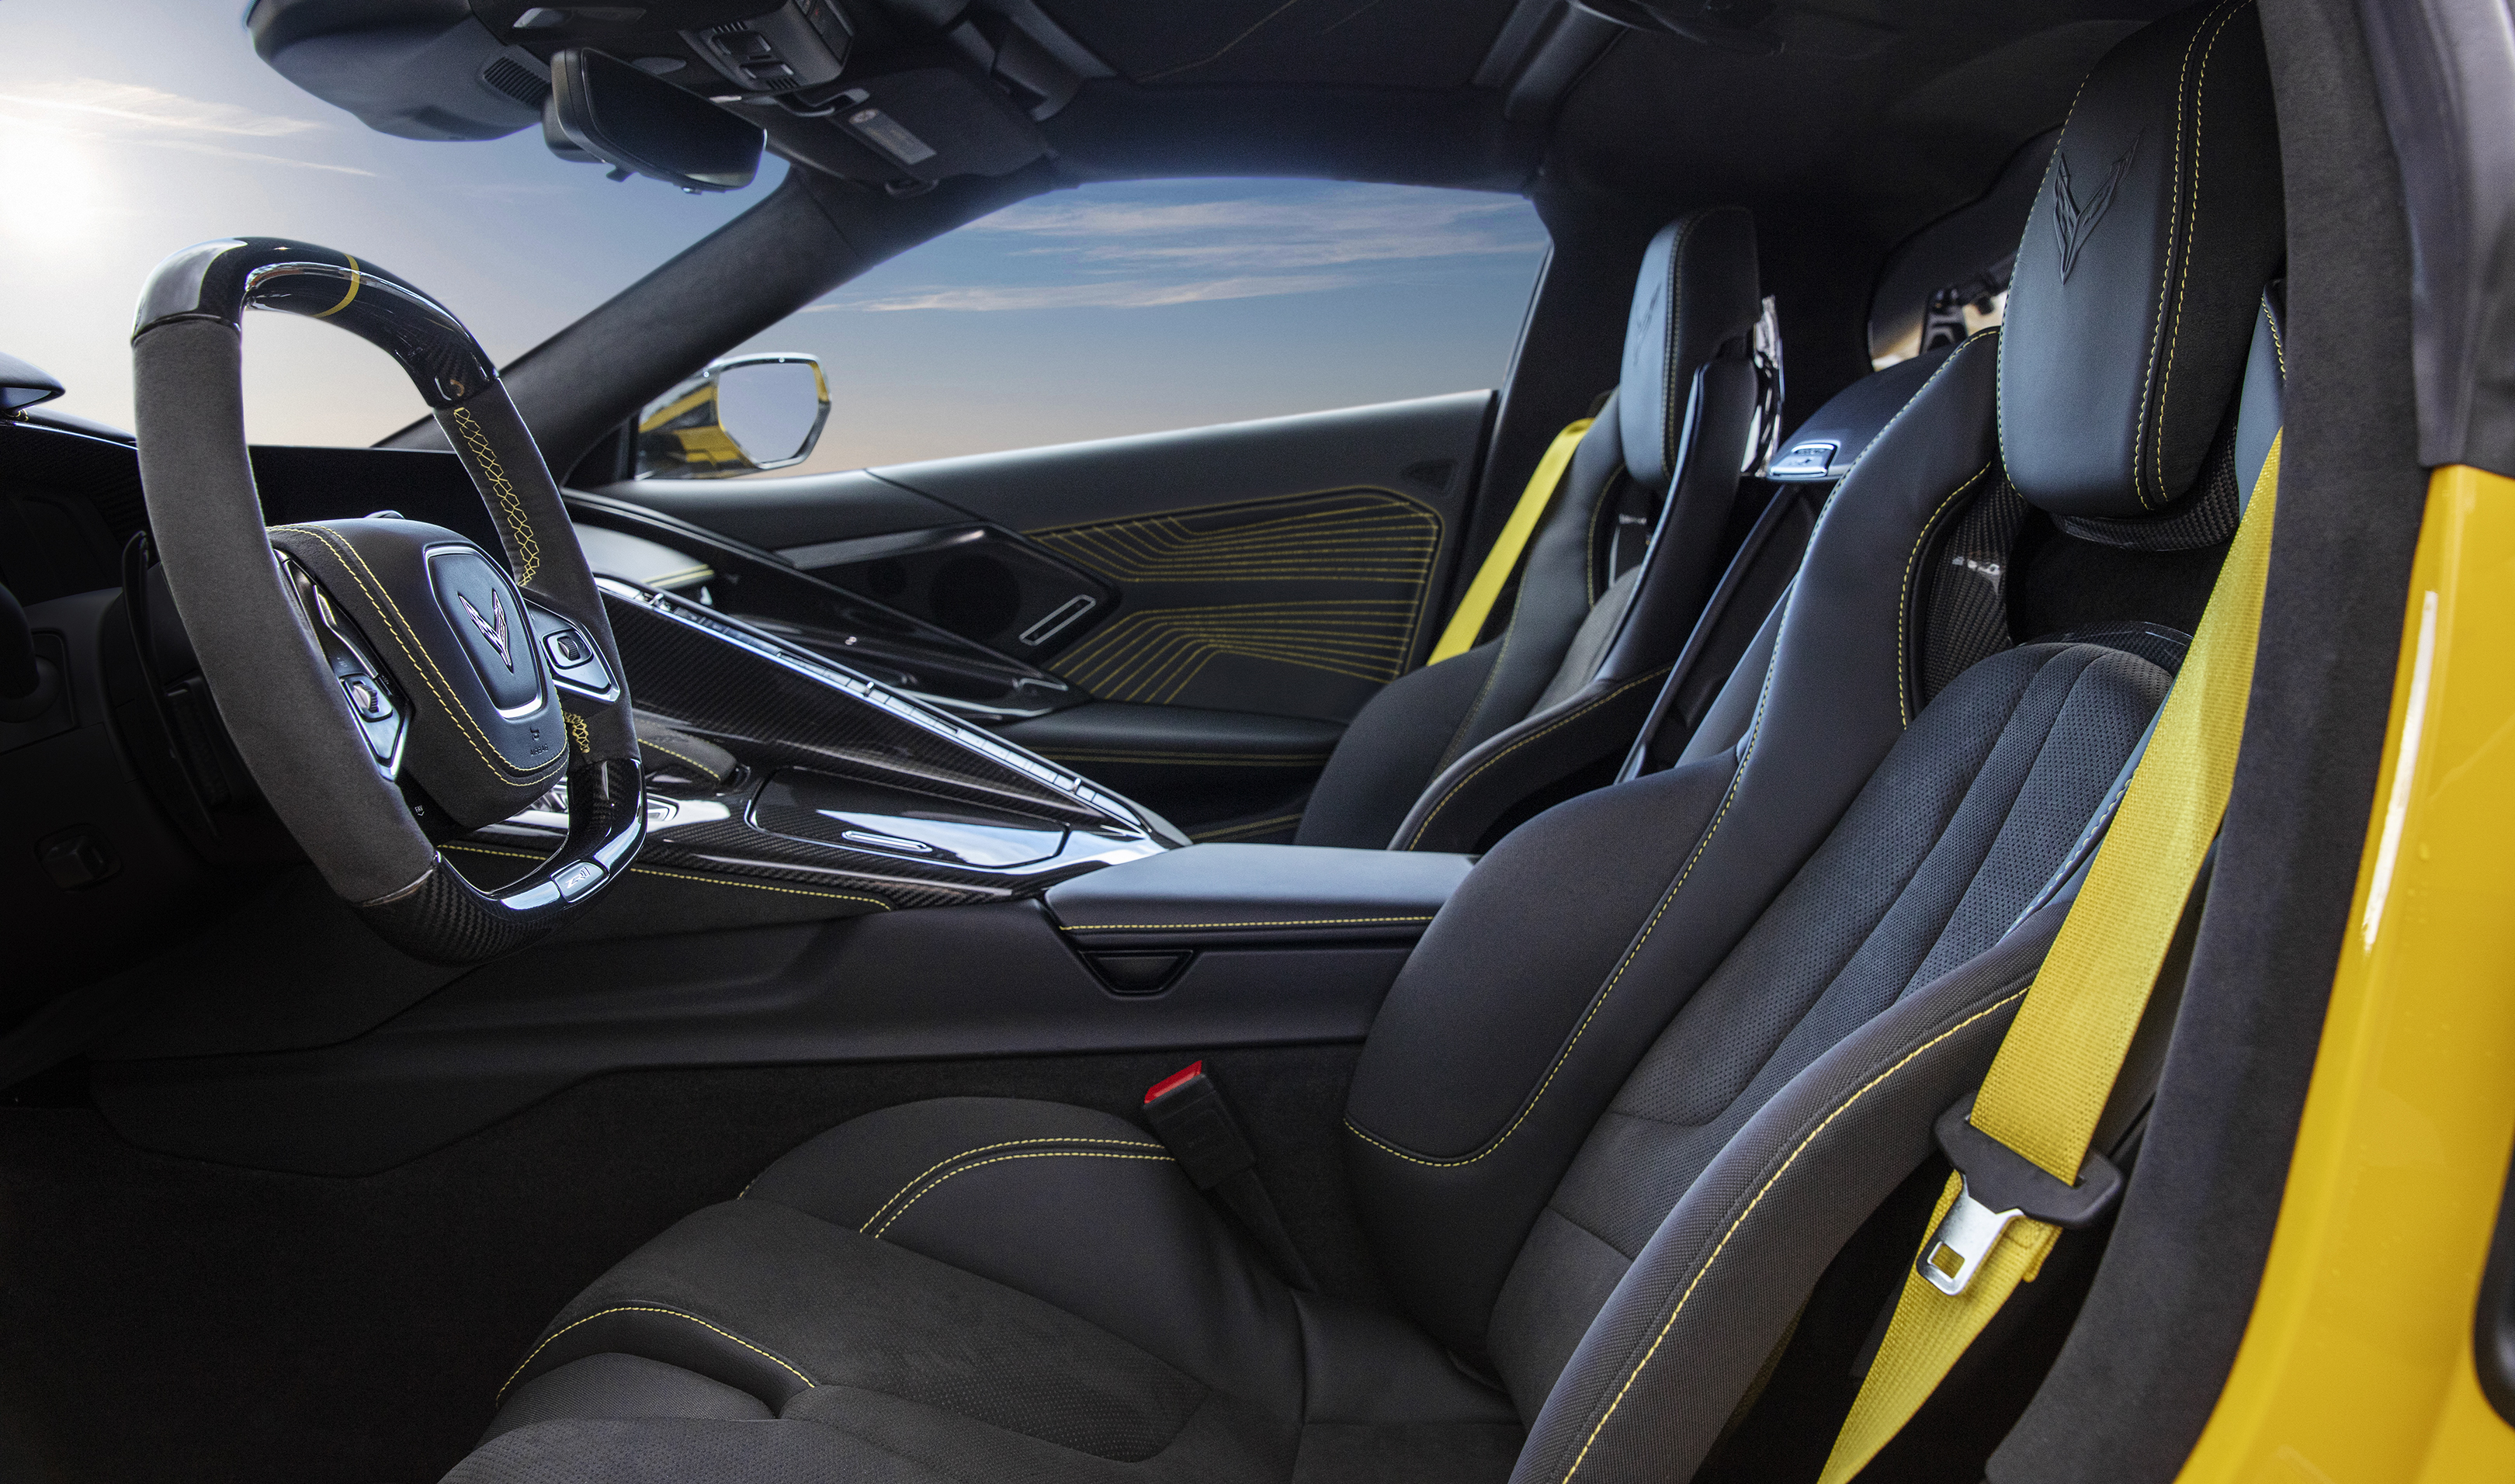 Chevrolet Corvette ZR1 Coupe interior, looking across the cabin from the driver’s side to passenger side. Preproduction model shown. Actual production model may vary.